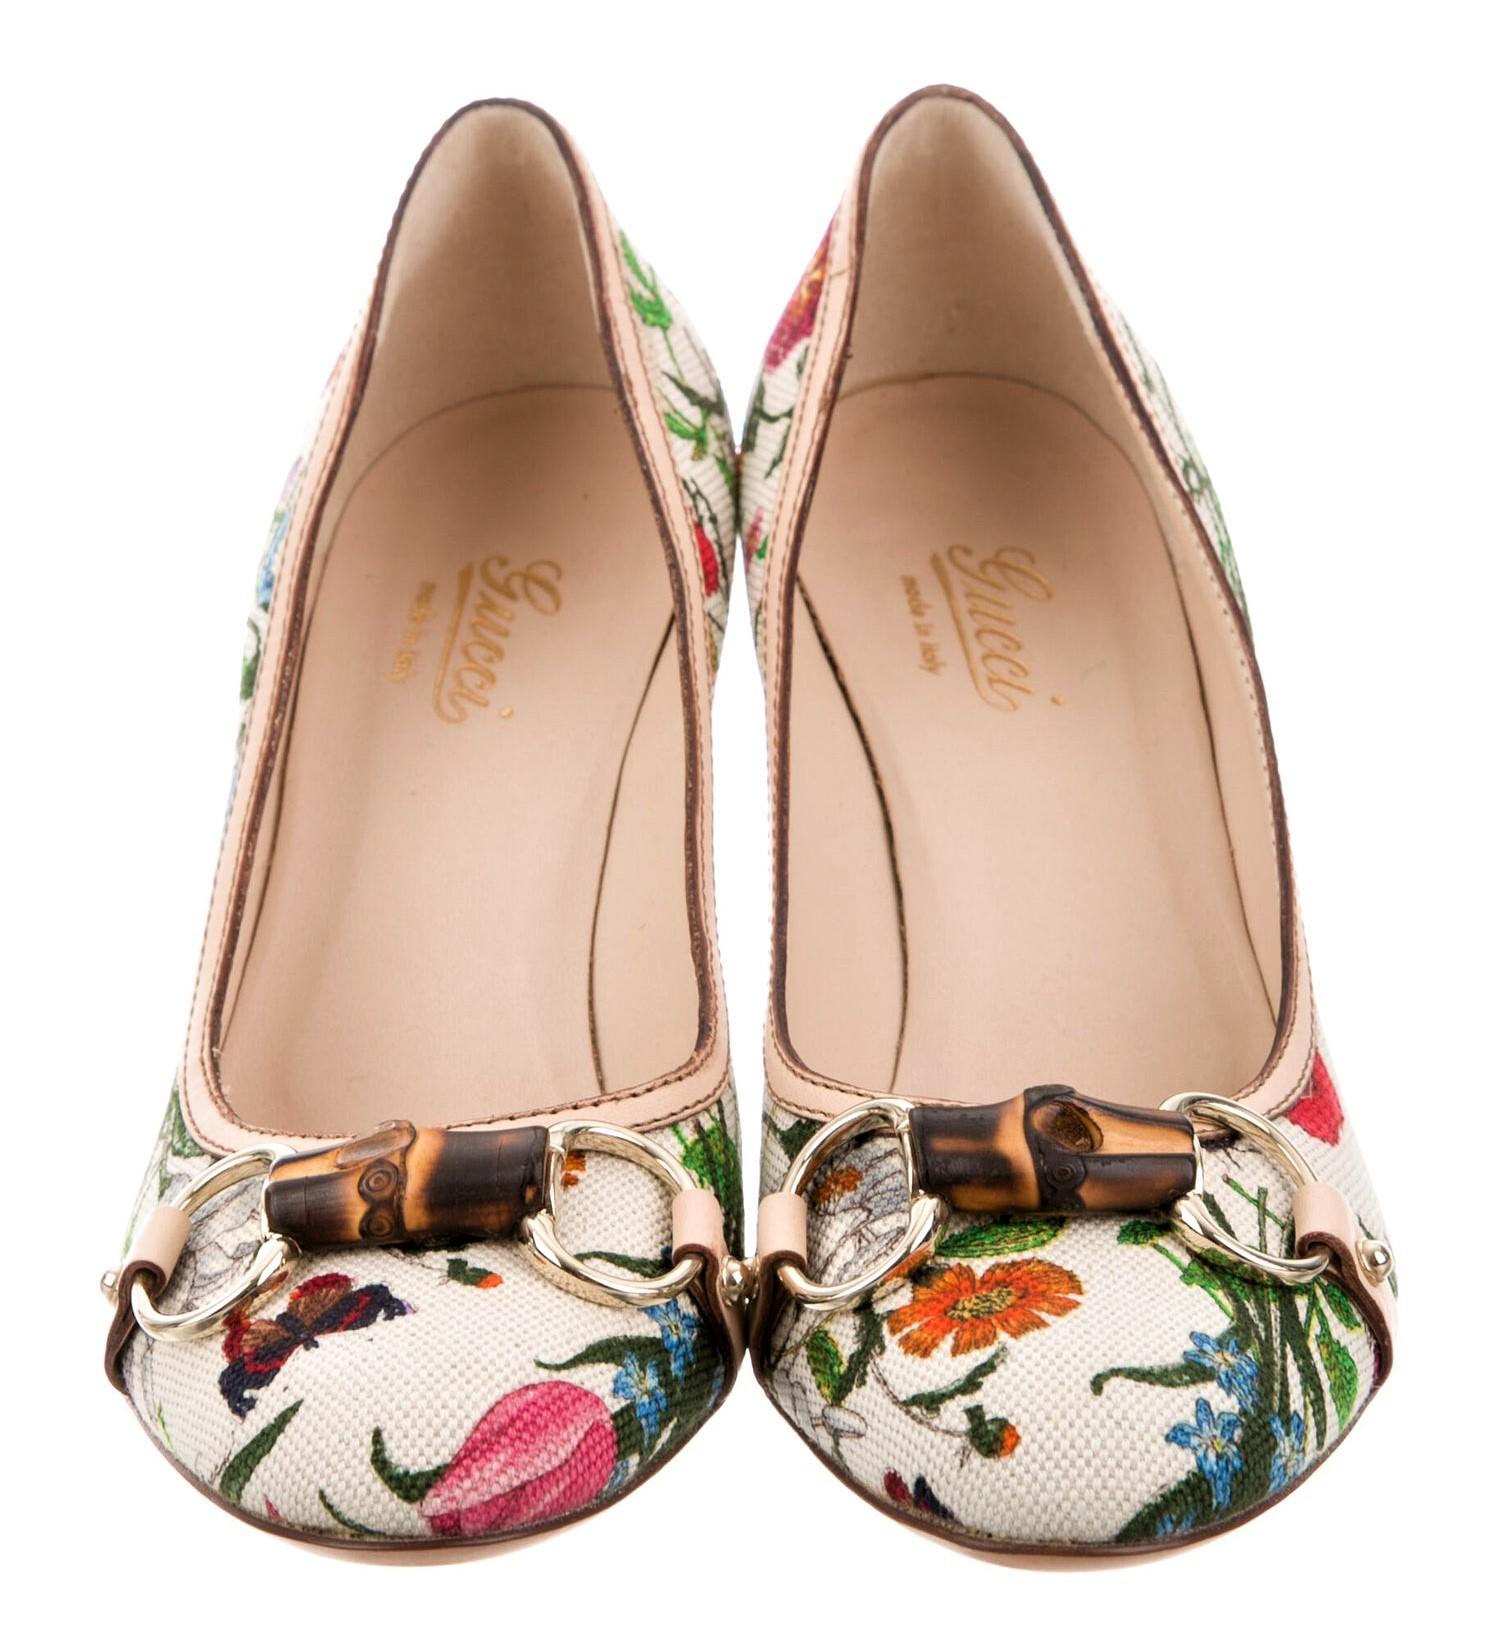 Brand New
Gucci Flora Heels
Size:  6.5
Beautiful Iconic Canvas Flora Pattern
Bamboo & Gold Hardware
Leather Footbed
Wood Heel
Heel Height 3